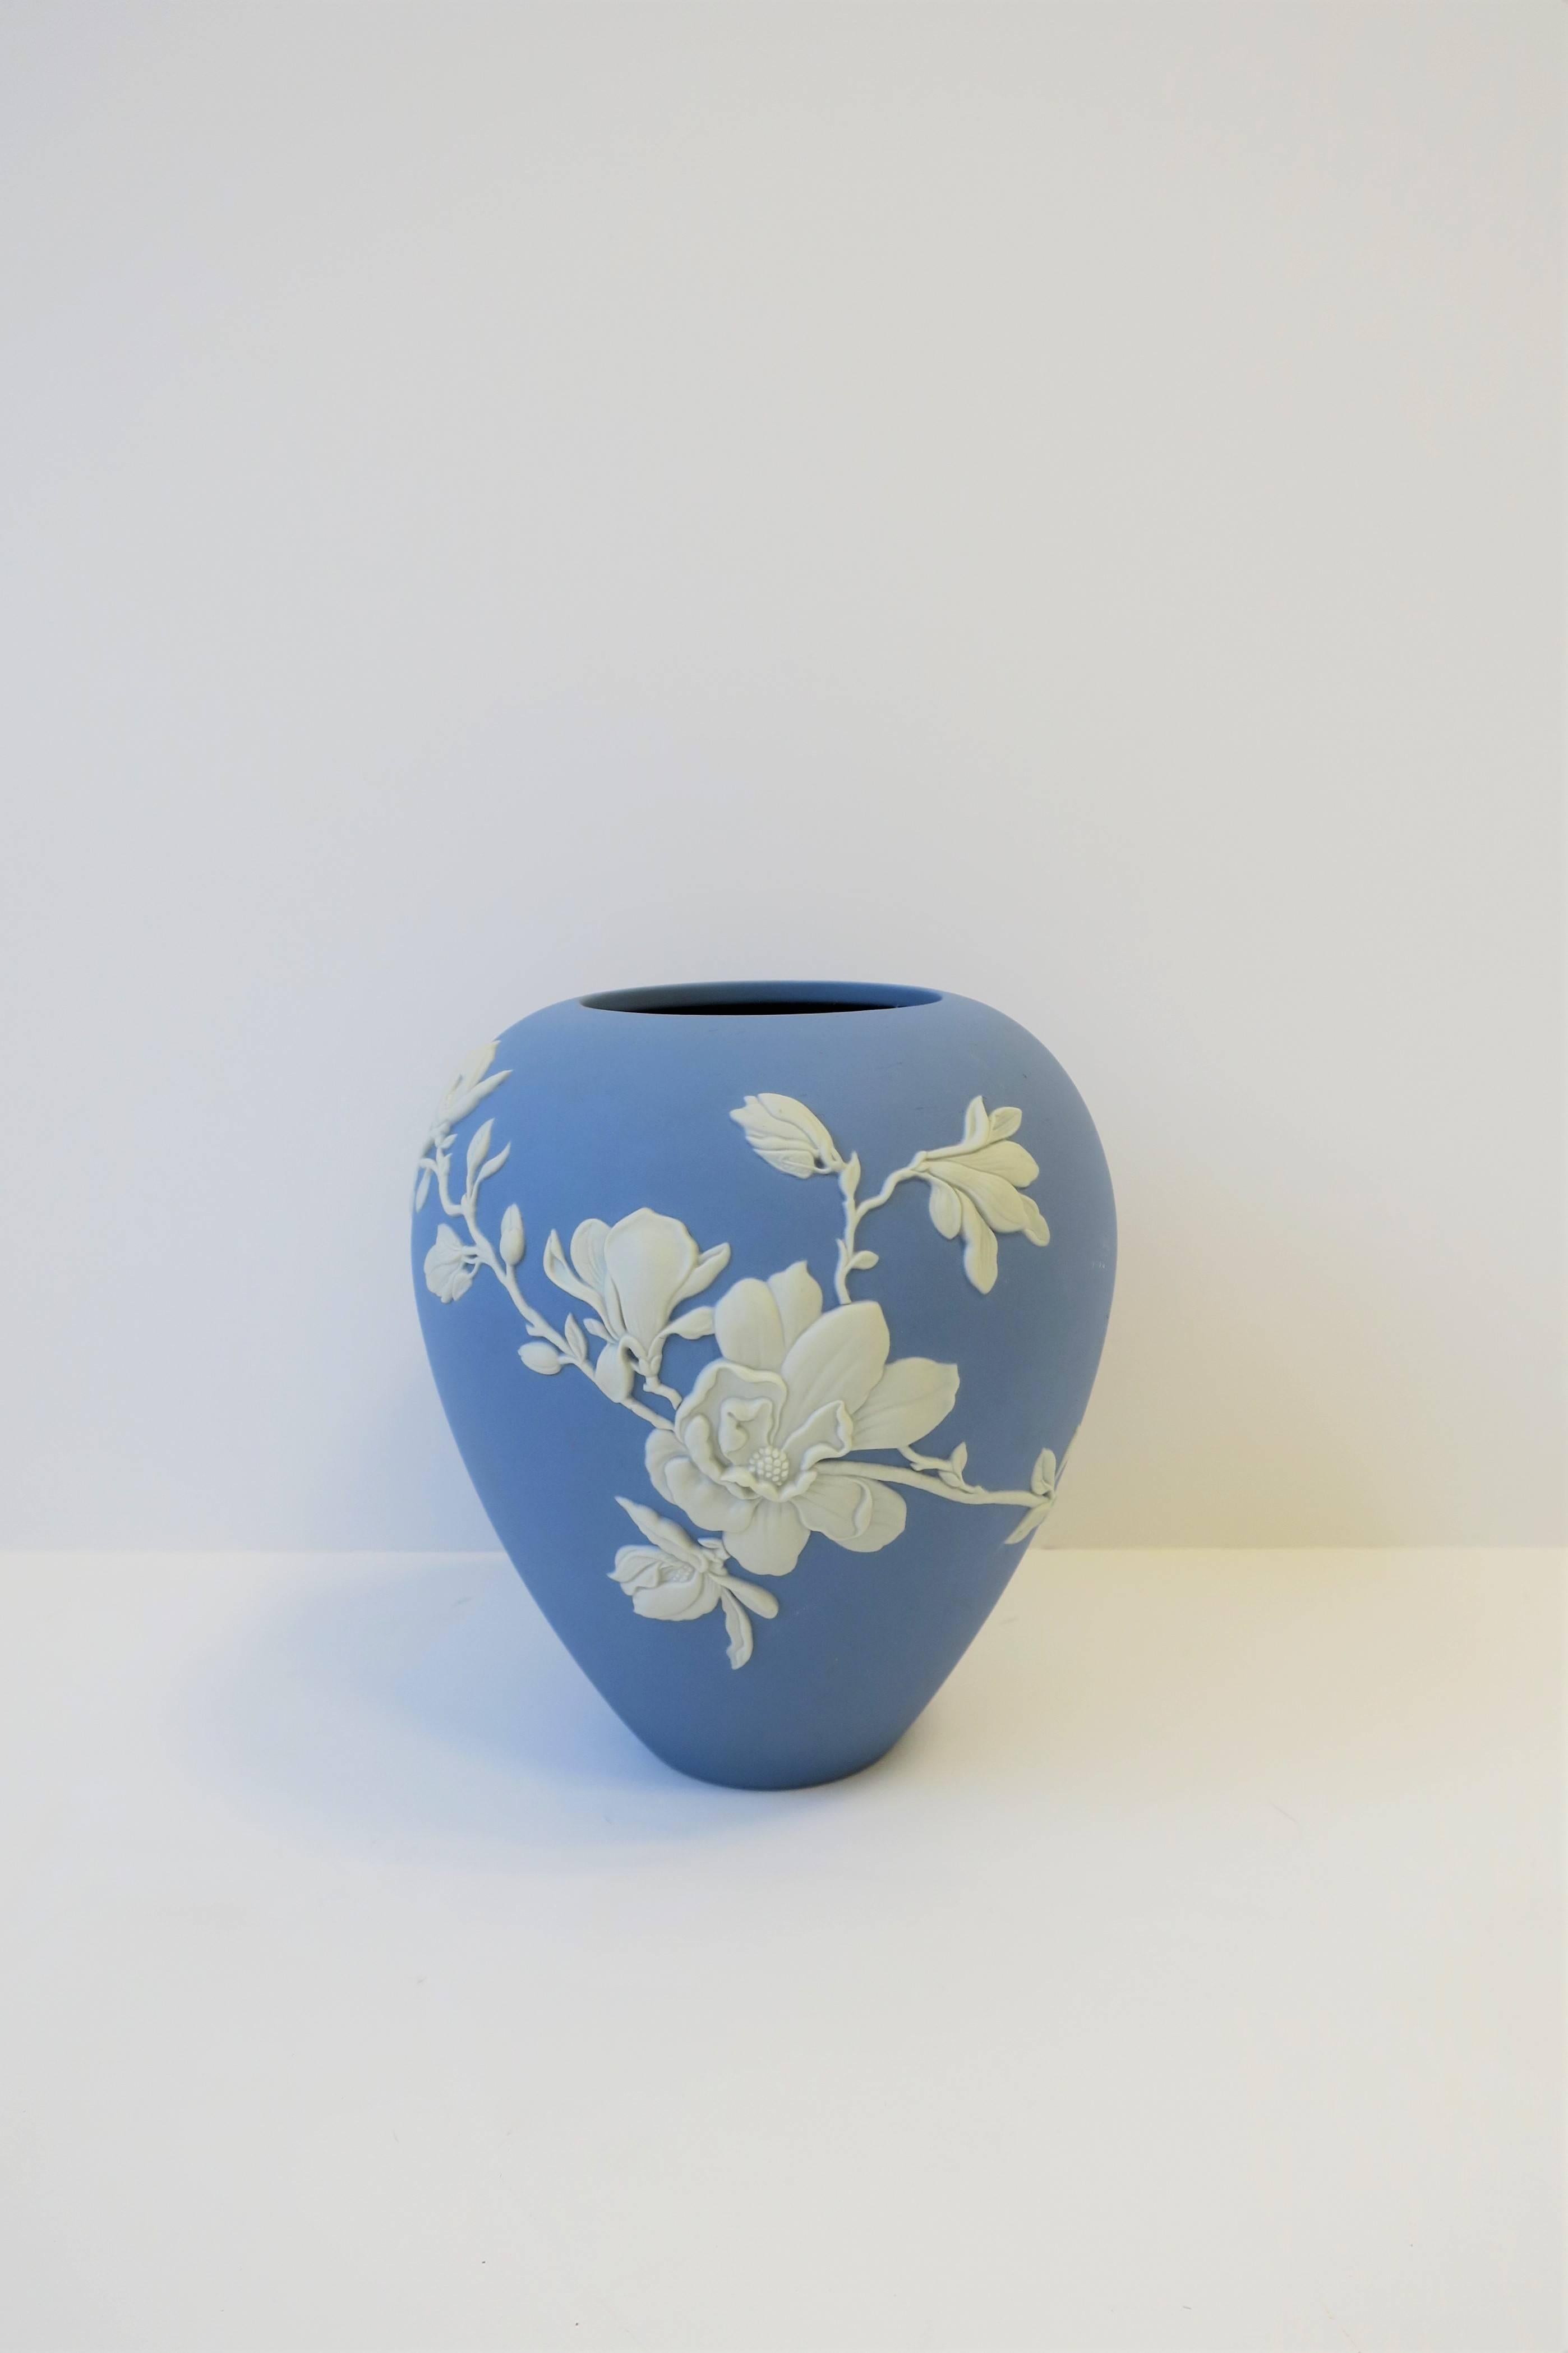 A beautiful blue and white matte Jasper stoneware Magnolia Blossom vase, by Wedgwood, England, 21st Century. Vase combines the familiar soft blue Jasper color palette with an organic shape and elegant white Magnolia flower in ornamental relief.